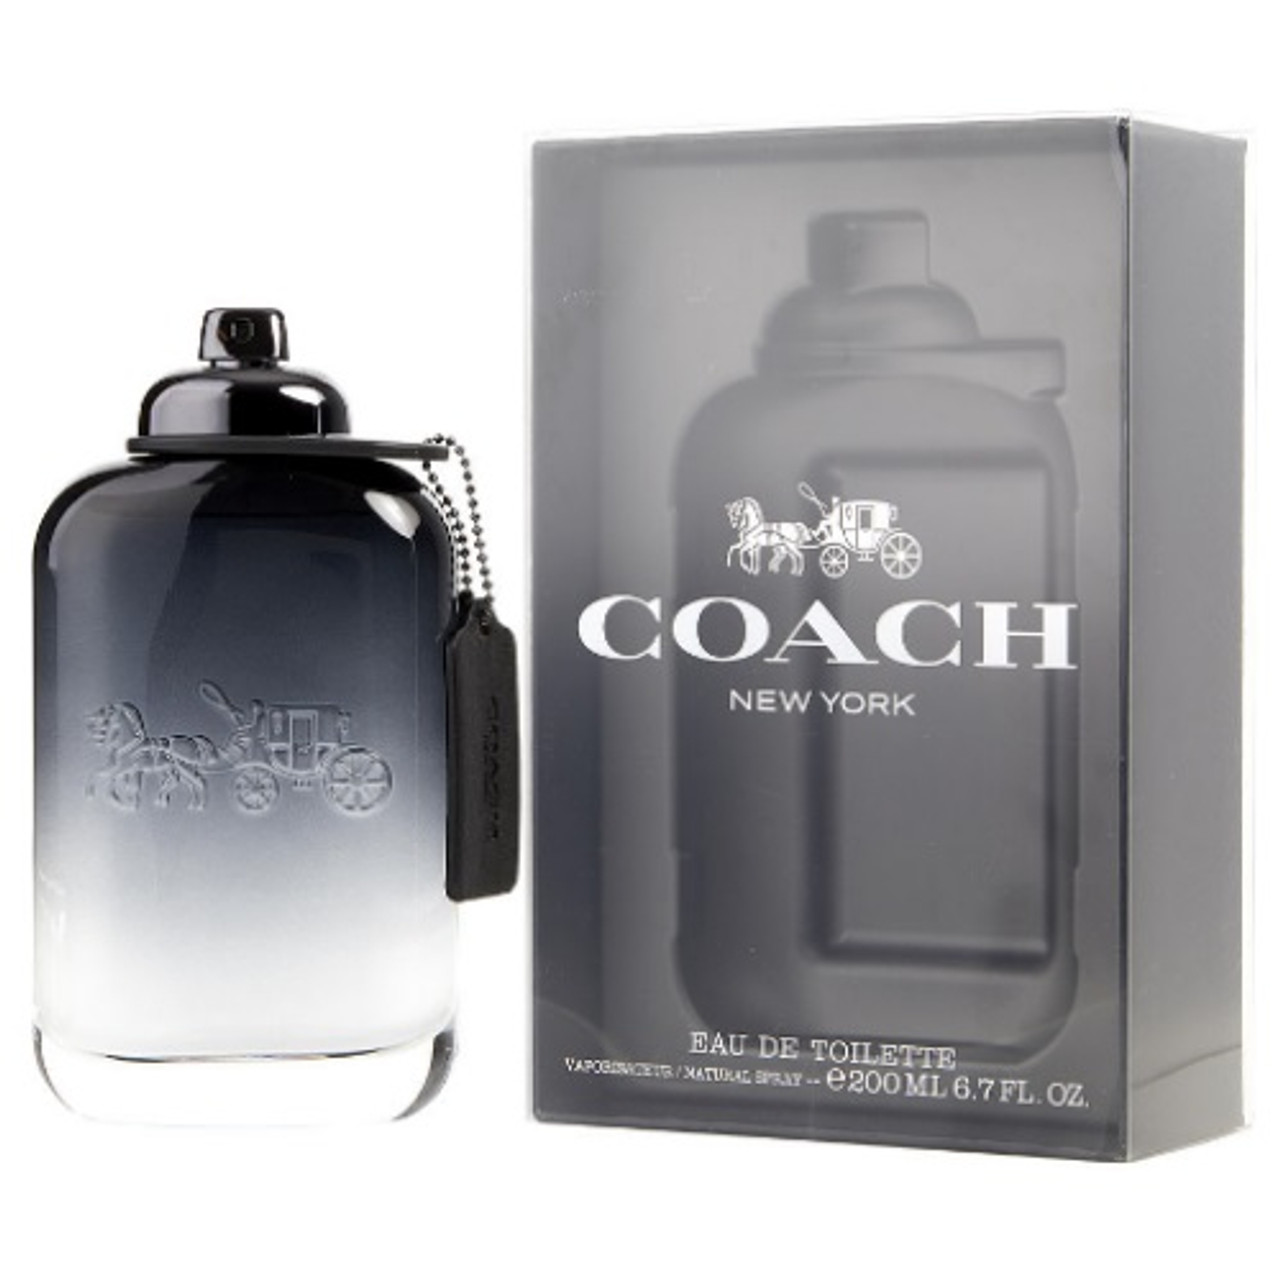 Coach New York by Coach 6.7 oz EDT for men